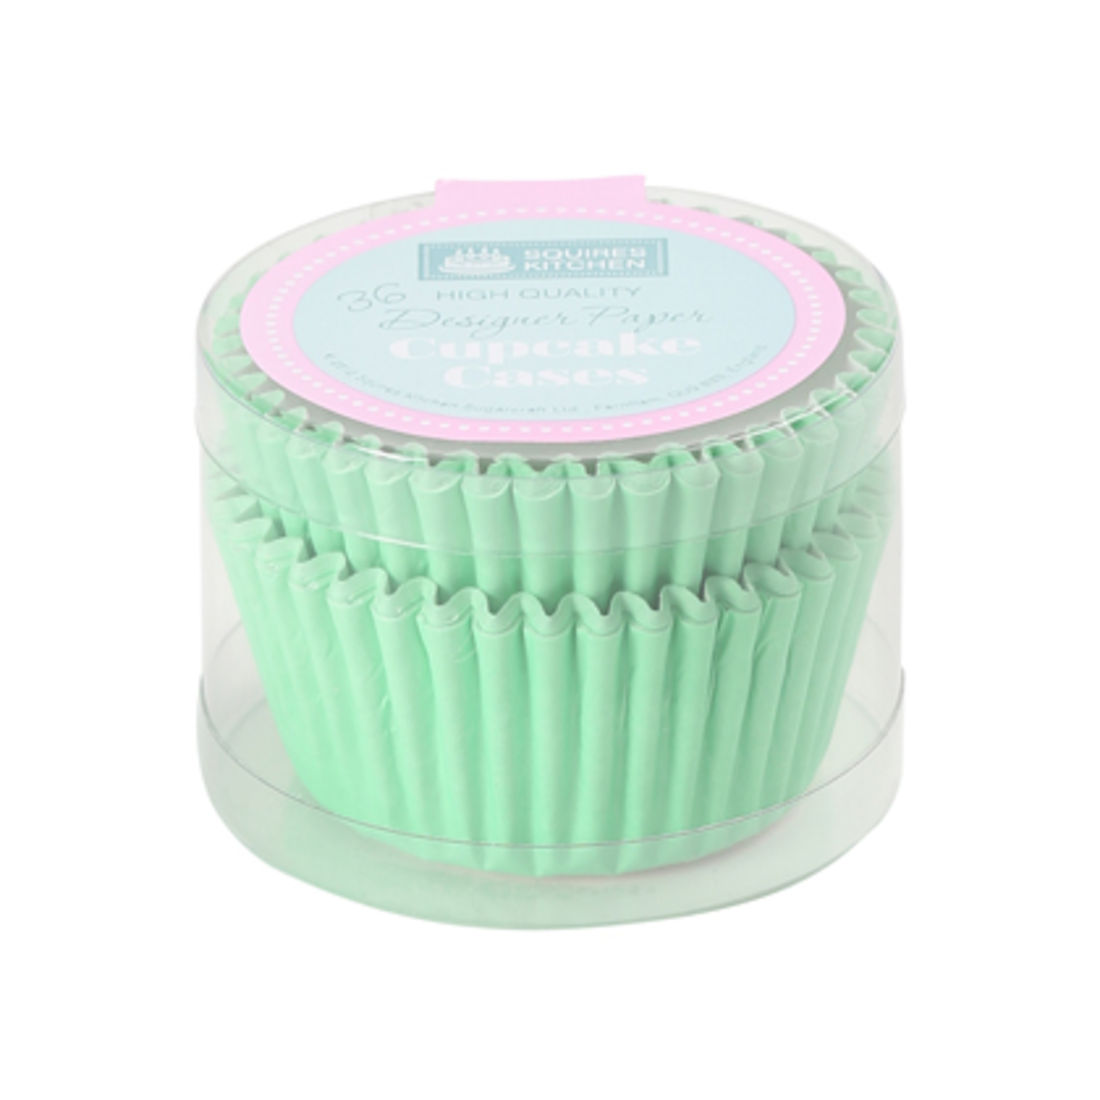 2001628 SK Cupcake Cases Colour Block Pack Of 36 Pastel Green